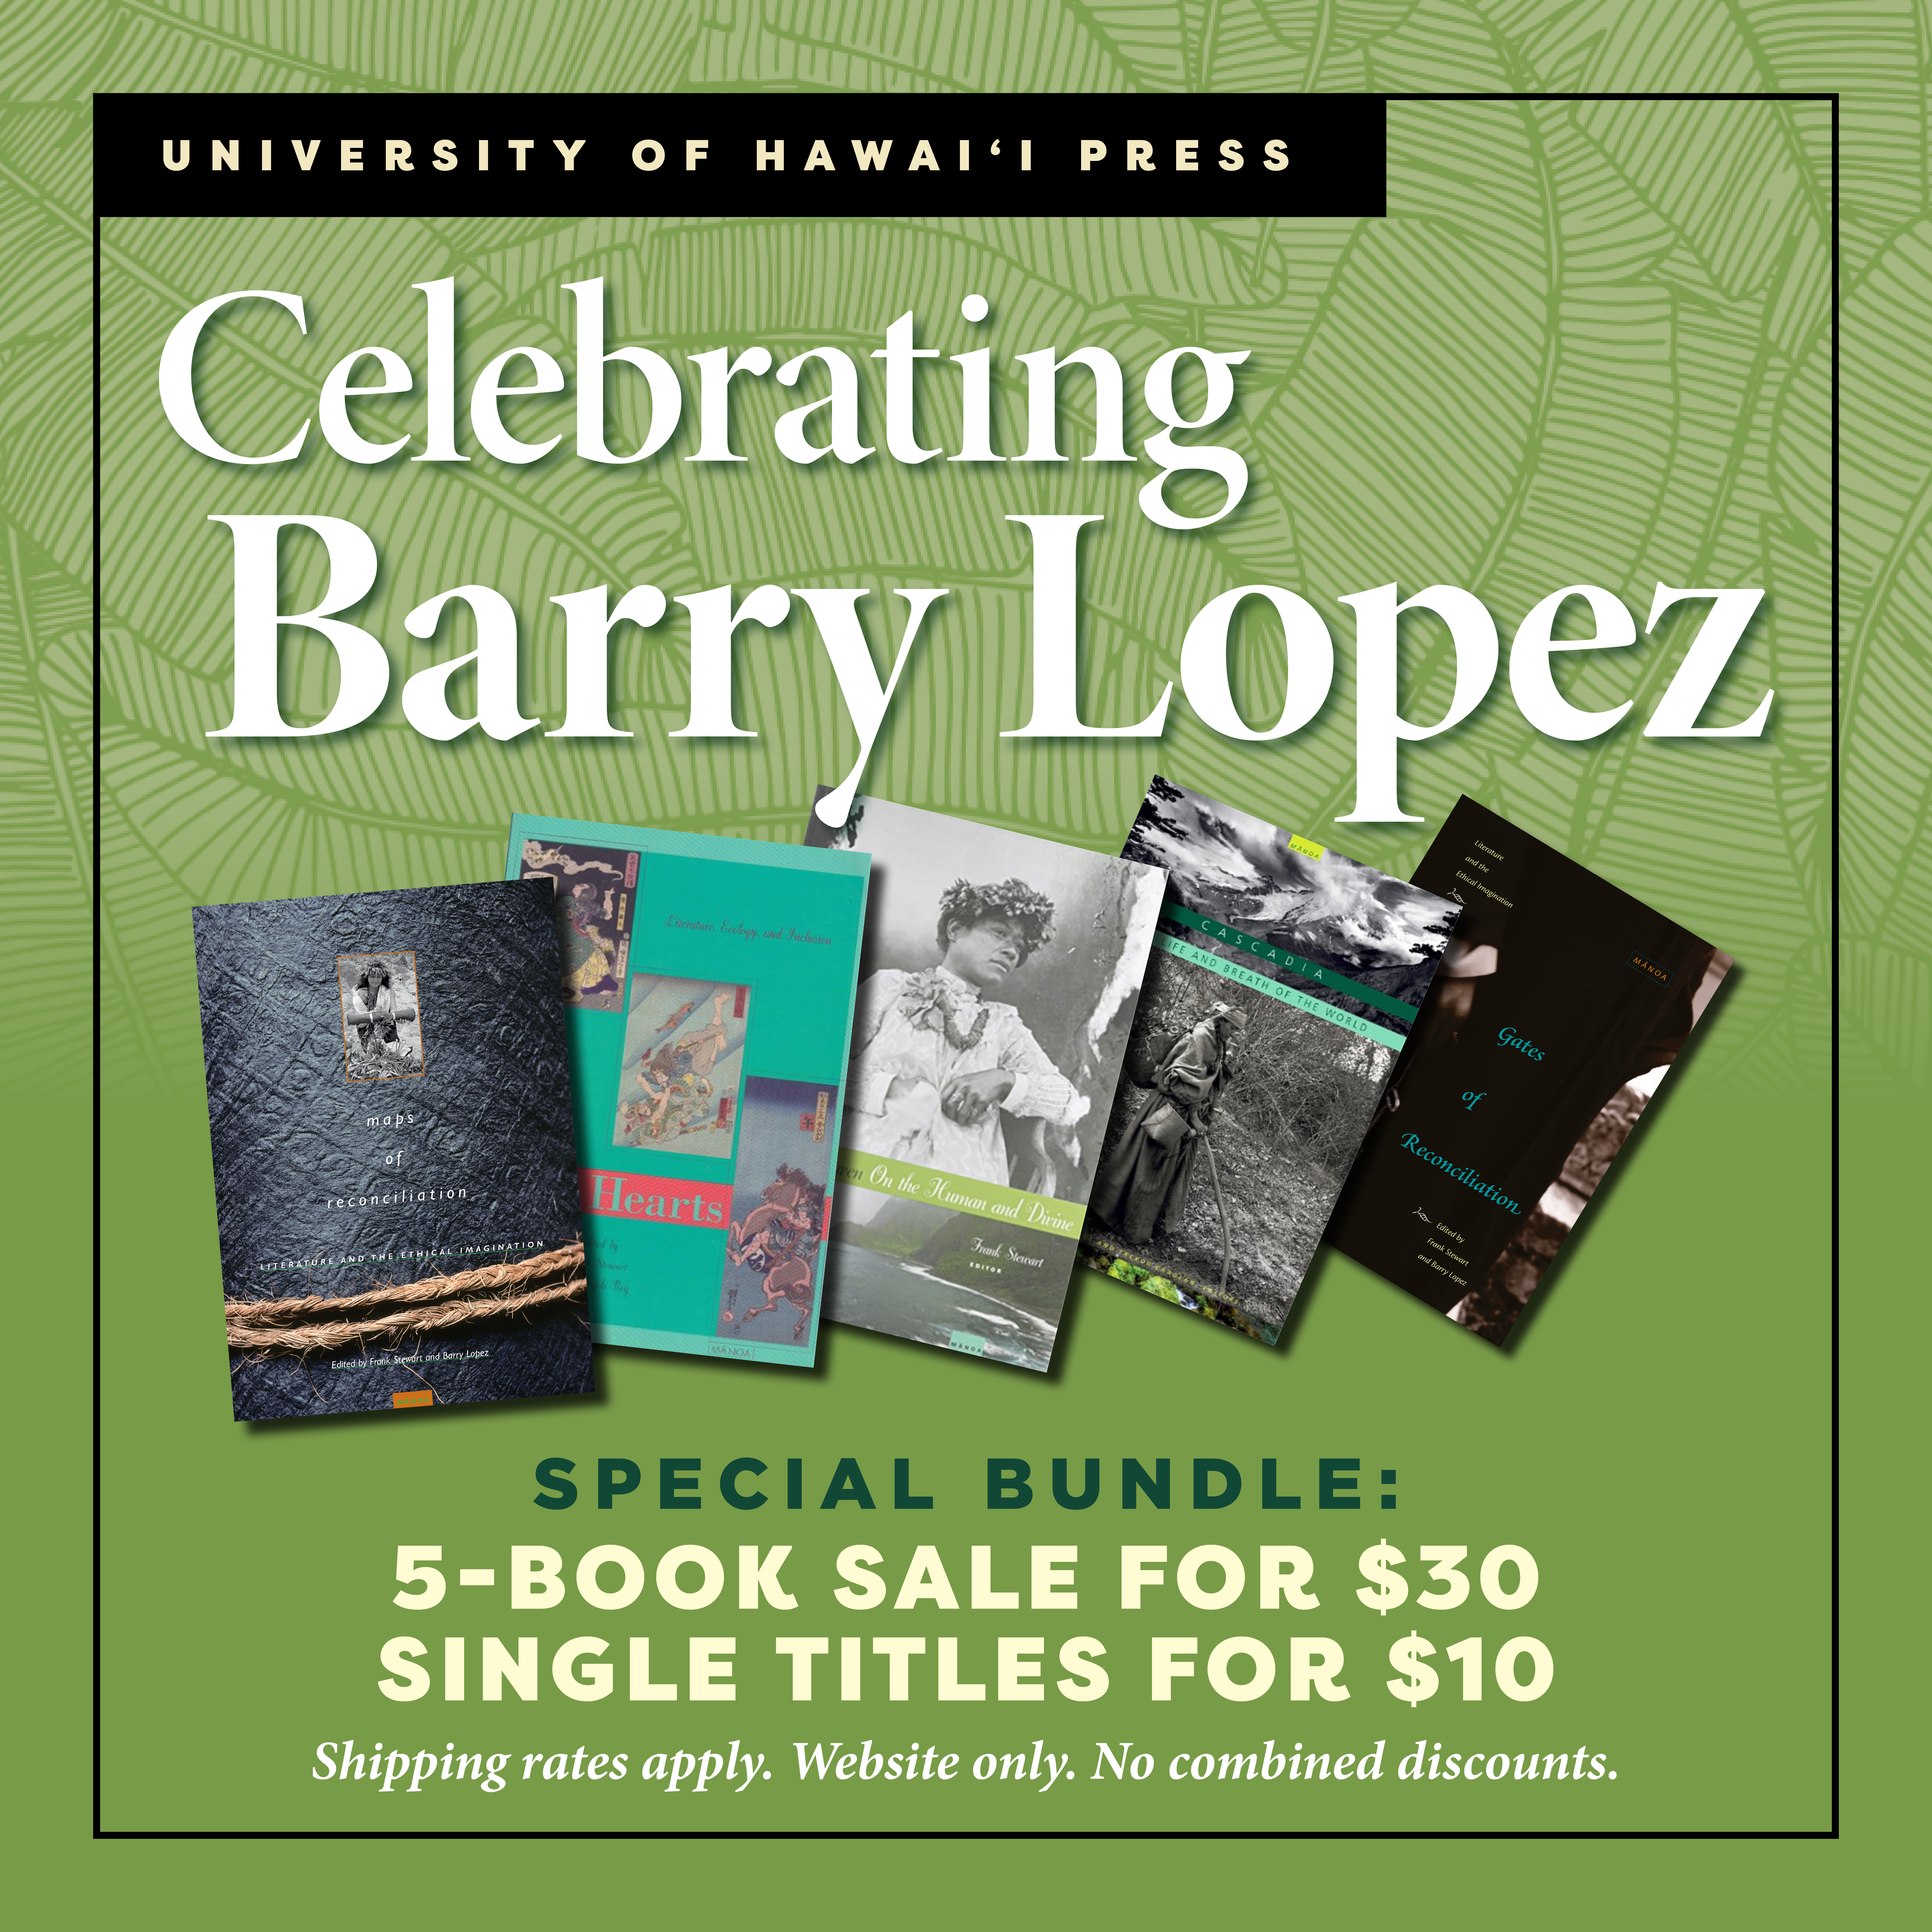 Celebrating Barry Lopez: Special Print Bundle Sale + Free Digital Special Issue